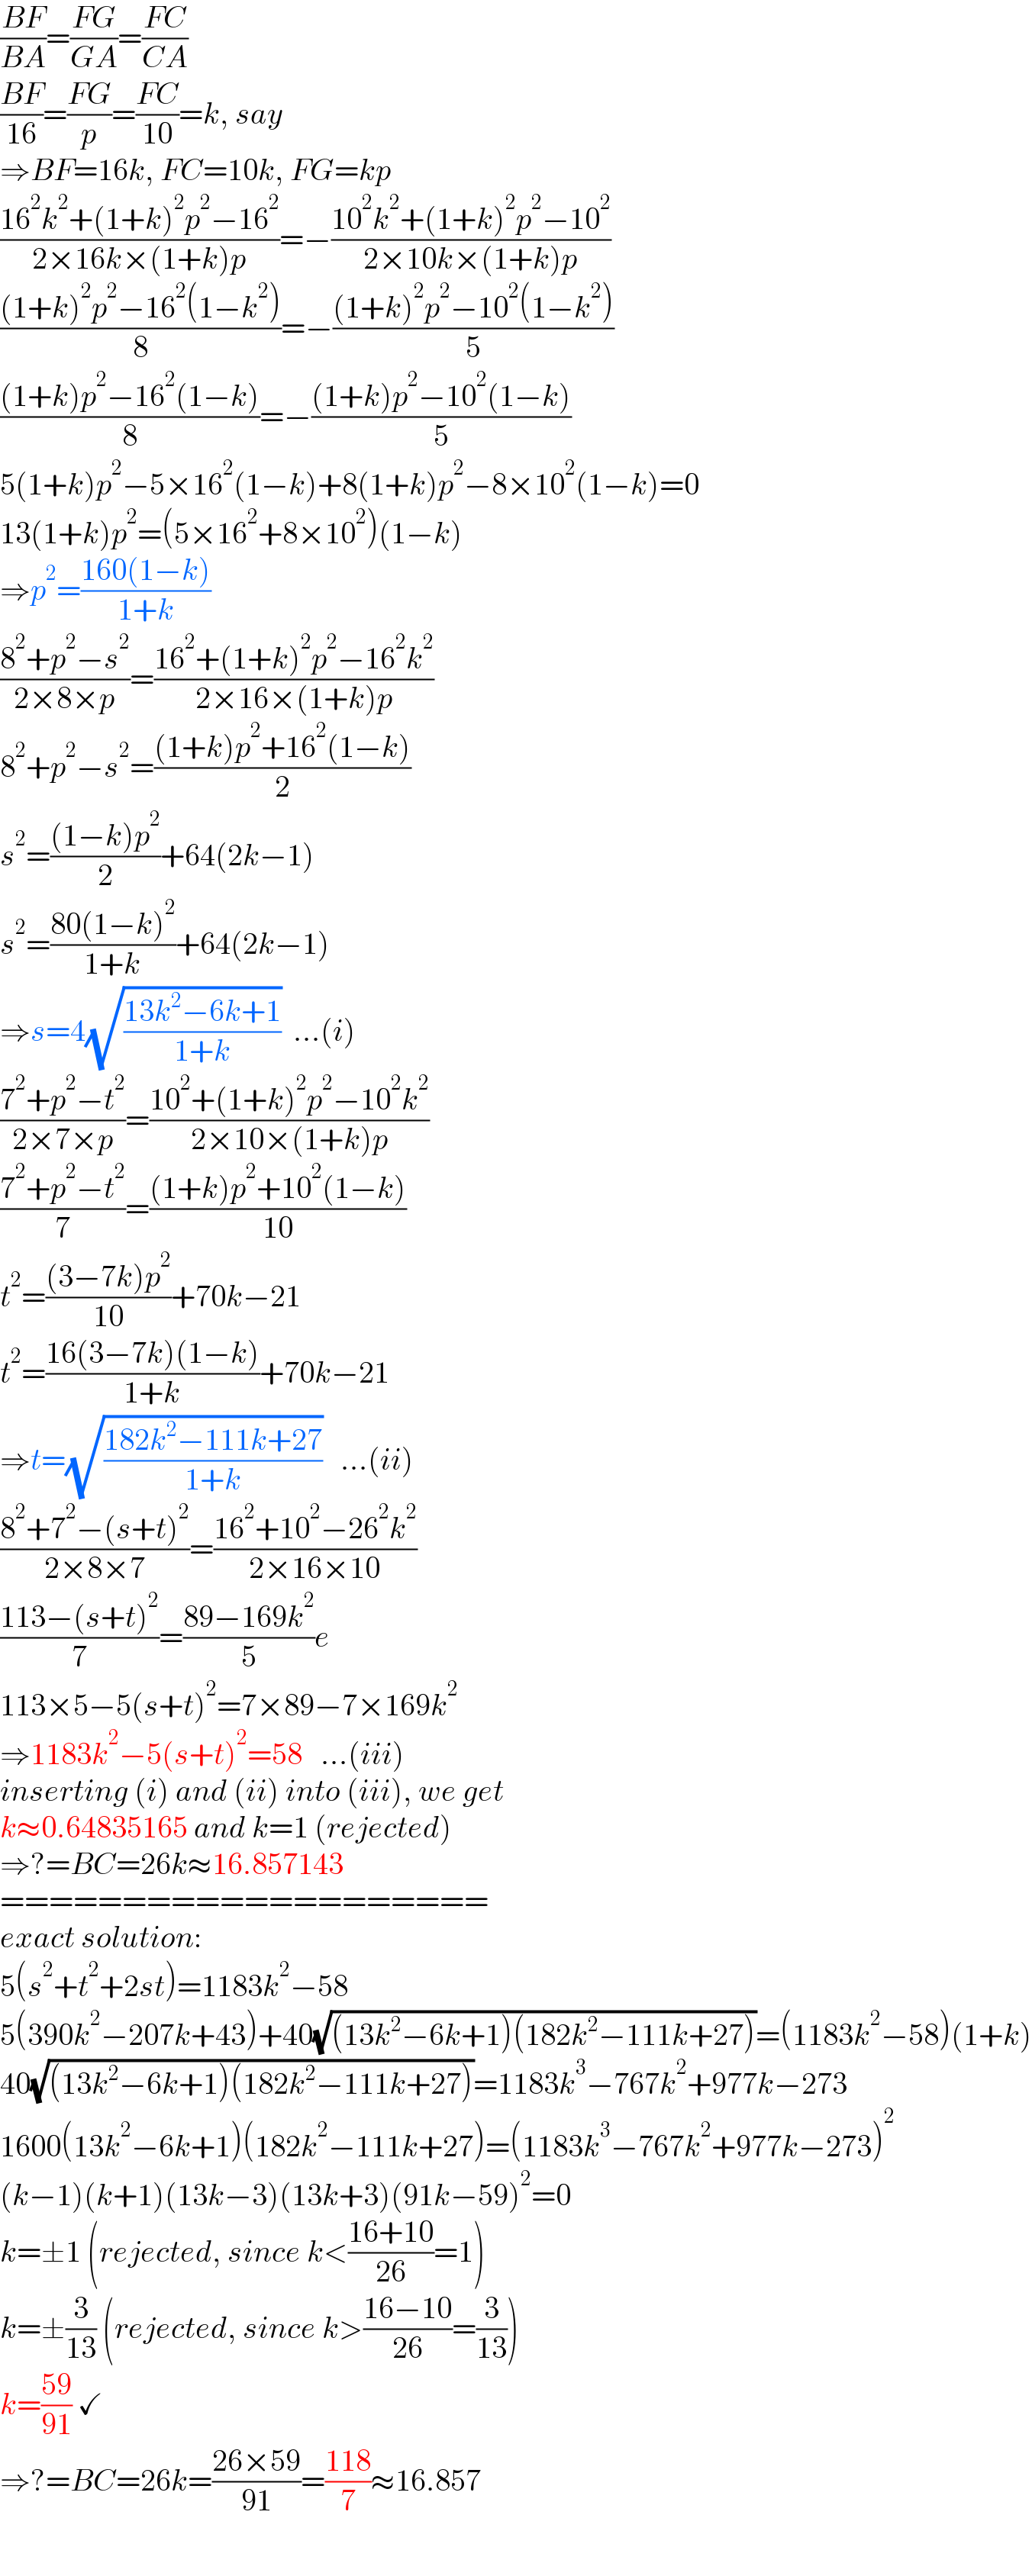 ((BF)/(BA))=((FG)/(GA))=((FC)/(CA))  ((BF)/(16))=((FG)/p)=((FC)/(10))=k, say  ⇒BF=16k, FC=10k, FG=kp  ((16^2 k^2 +(1+k)^2 p^2 −16^2 )/(2×16k×(1+k)p))=−((10^2 k^2 +(1+k)^2 p^2 −10^2 )/(2×10k×(1+k)p))  (((1+k)^2 p^2 −16^2 (1−k^2 ))/8)=−(((1+k)^2 p^2 −10^2 (1−k^2 ))/5)  (((1+k)p^2 −16^2 (1−k))/8)=−(((1+k)p^2 −10^2 (1−k))/5)  5(1+k)p^2 −5×16^2 (1−k)+8(1+k)p^2 −8×10^2 (1−k)=0  13(1+k)p^2 =(5×16^2 +8×10^2 )(1−k)  ⇒p^2 =((160(1−k))/(1+k))  ((8^2 +p^2 −s^2 )/(2×8×p))=((16^2 +(1+k)^2 p^2 −16^2 k^2 )/(2×16×(1+k)p))  8^2 +p^2 −s^2 =(((1+k)p^2 +16^2 (1−k))/2)  s^2 =(((1−k)p^2 )/2)+64(2k−1)  s^2 =((80(1−k)^2 )/(1+k))+64(2k−1)  ⇒s=4(√((13k^2 −6k+1)/(1+k)))  ...(i)  ((7^2 +p^2 −t^2 )/(2×7×p))=((10^2 +(1+k)^2 p^2 −10^2 k^2 )/(2×10×(1+k)p))  ((7^2 +p^2 −t^2 )/7)=(((1+k)p^2 +10^2 (1−k))/(10))  t^2 =(((3−7k)p^2 )/(10))+70k−21  t^2 =((16(3−7k)(1−k))/(1+k))+70k−21  ⇒t=(√((182k^2 −111k+27)/(1+k)))   ...(ii)  ((8^2 +7^2 −(s+t)^2 )/(2×8×7))=((16^2 +10^2 −26^2 k^2 )/(2×16×10))  ((113−(s+t)^2 )/7)=((89−169k^2 )/5)e  113×5−5(s+t)^2 =7×89−7×169k^2   ⇒1183k^2 −5(s+t)^2 =58   ...(iii)  inserting (i) and (ii) into (iii), we get  k≈0.64835165 and k=1 (rejected)  ⇒?=BC=26k≈16.857143  ====================  exact solution:  5(s^2 +t^2 +2st)=1183k^2 −58  5(390k^2 −207k+43)+40(√((13k^2 −6k+1)(182k^2 −111k+27)))=(1183k^2 −58)(1+k)  40(√((13k^2 −6k+1)(182k^2 −111k+27)))=1183k^3 −767k^2 +977k−273  1600(13k^2 −6k+1)(182k^2 −111k+27)=(1183k^3 −767k^2 +977k−273)^2   (k−1)(k+1)(13k−3)(13k+3)(91k−59)^2 =0  k=±1 (rejected, since k<((16+10)/(26))=1)  k=±(3/(13)) (rejected, since k>((16−10)/(26))=(3/(13)))  k=((59)/(91)) ✓  ⇒?=BC=26k=((26×59)/(91))=((118)/7)≈16.857  